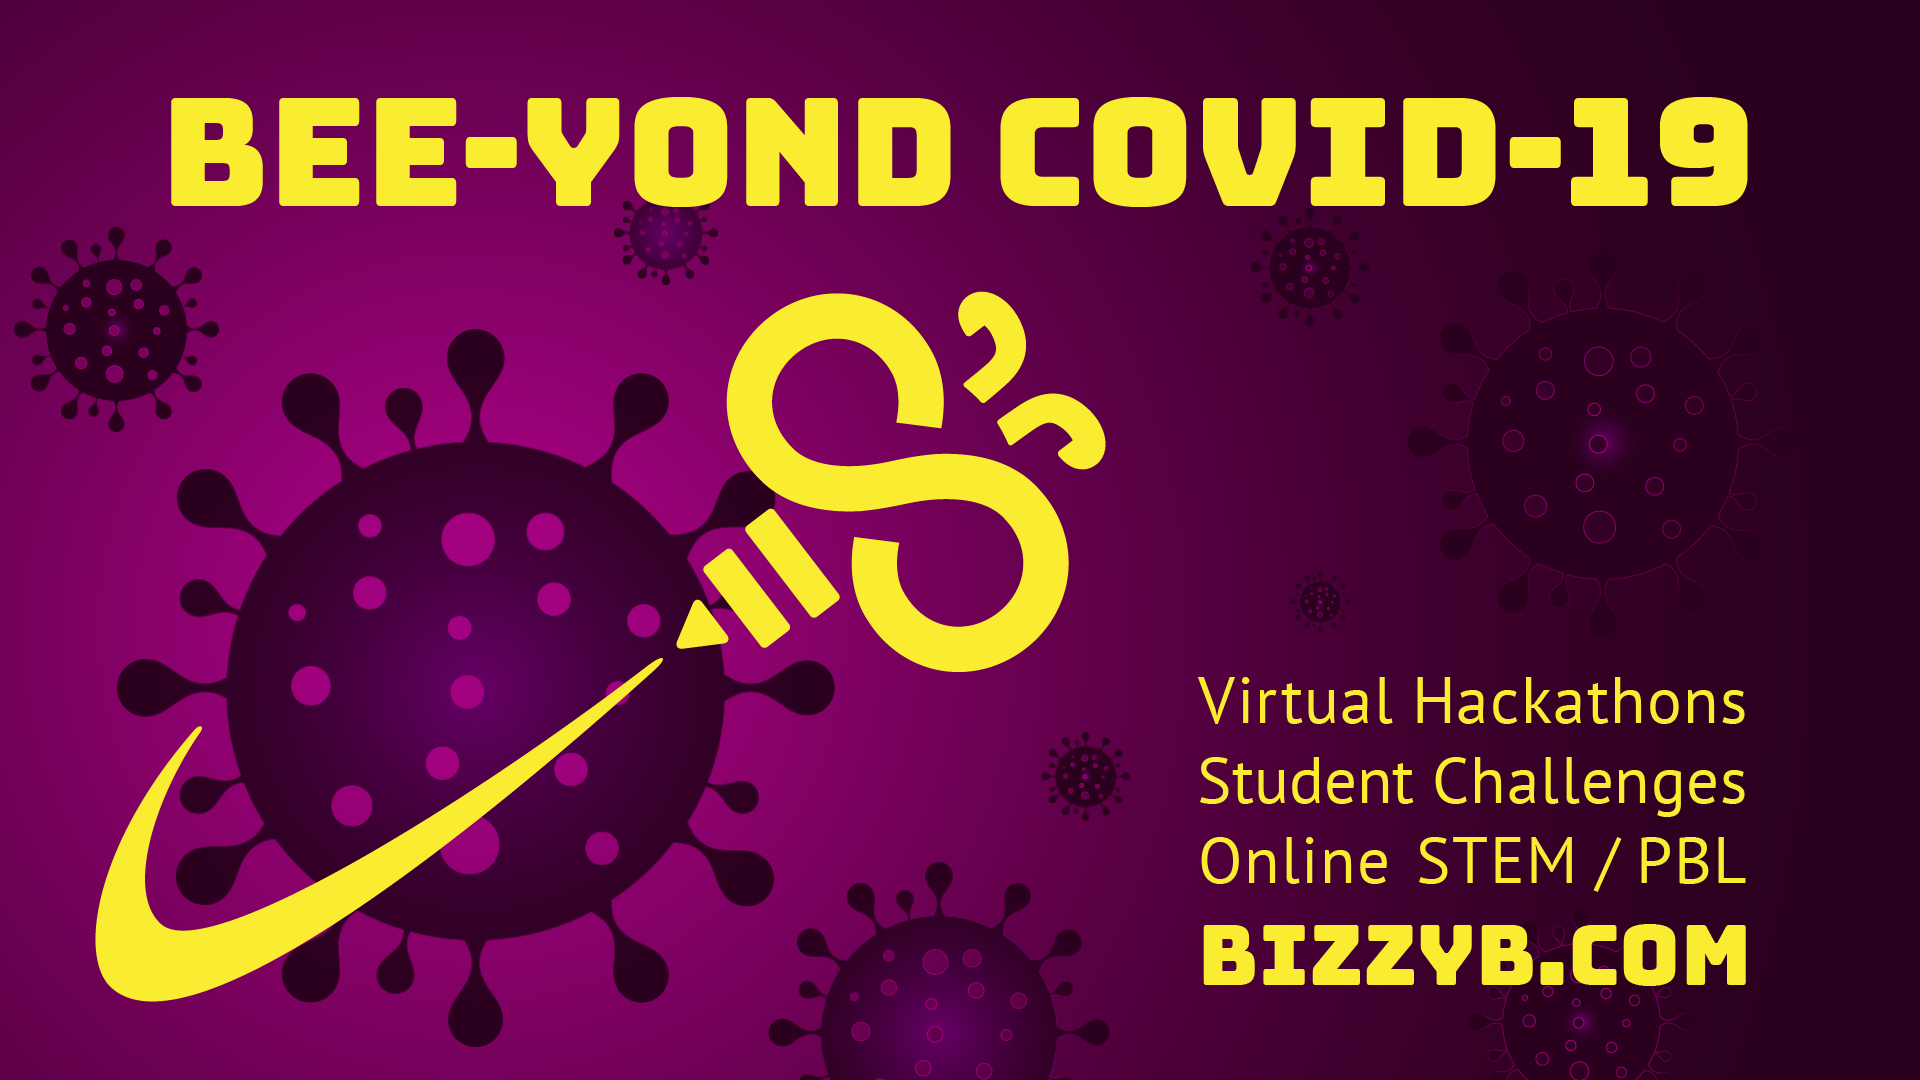 Bee-yond COVID-19 BizzyB promotional graphic